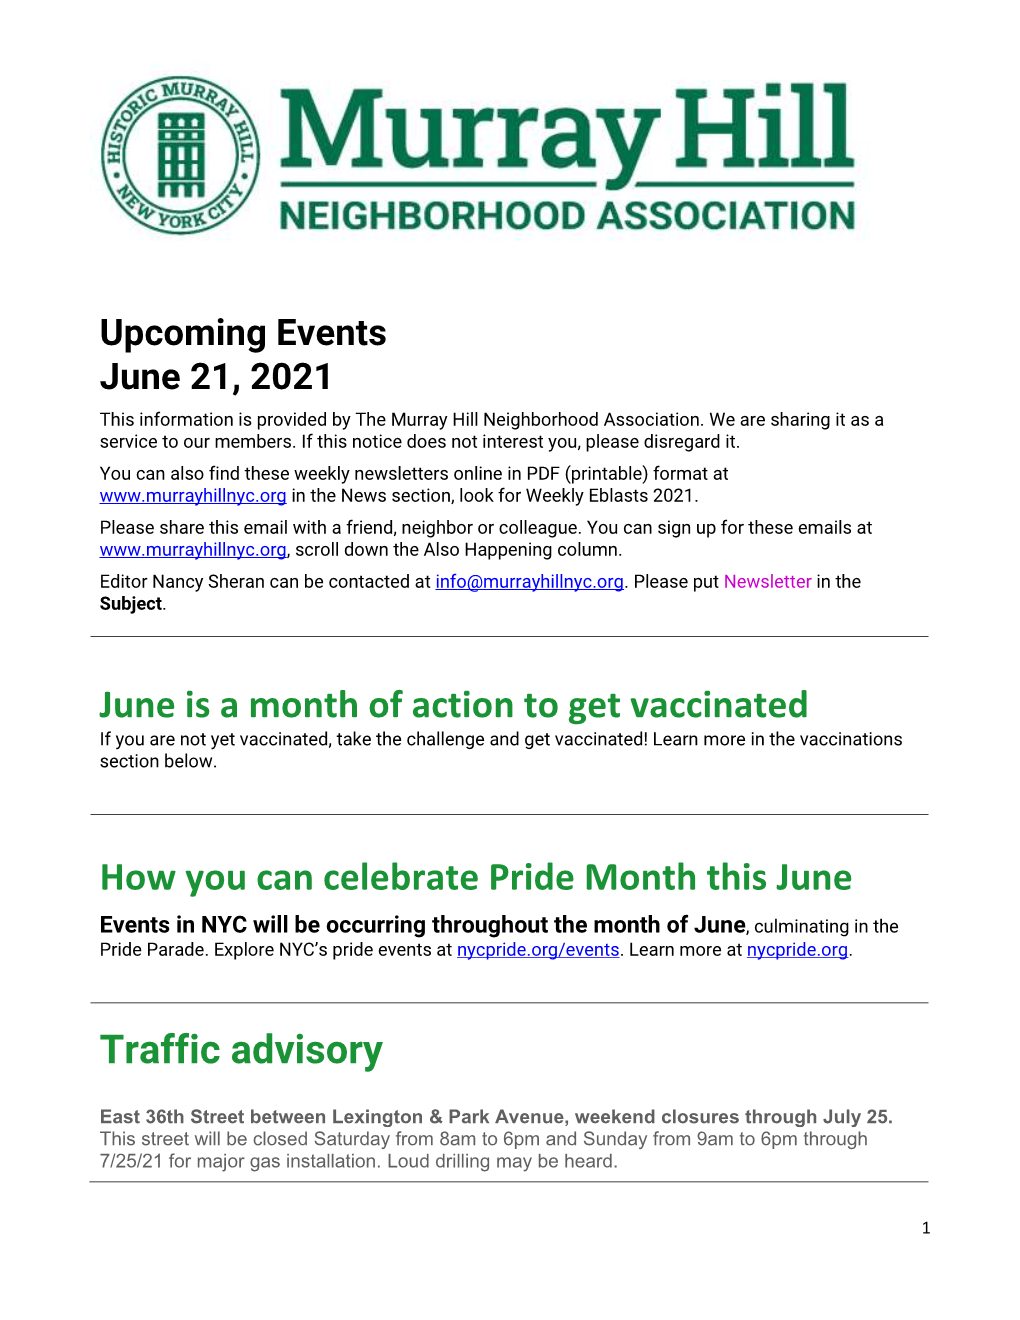 Upcoming Events June 21, 2021 This Information Is Provided by the Murray Hill Neighborhood Association